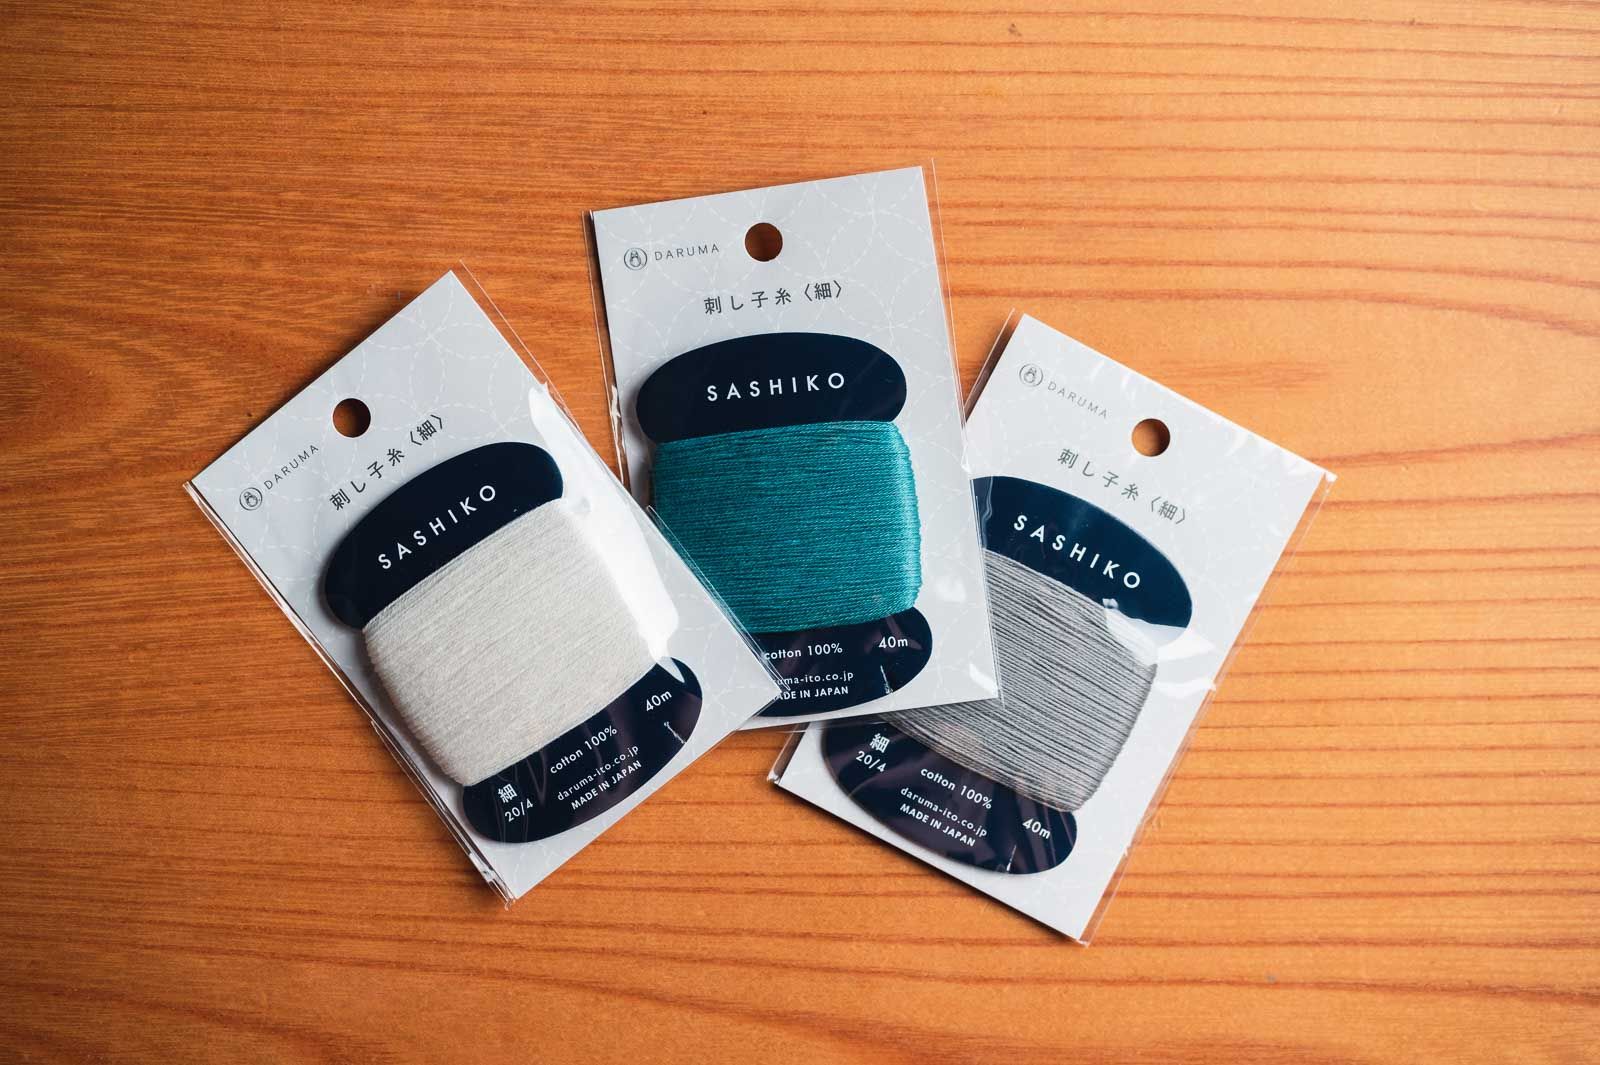 Three packages of thread by Daruma in the colors white, teal and gray